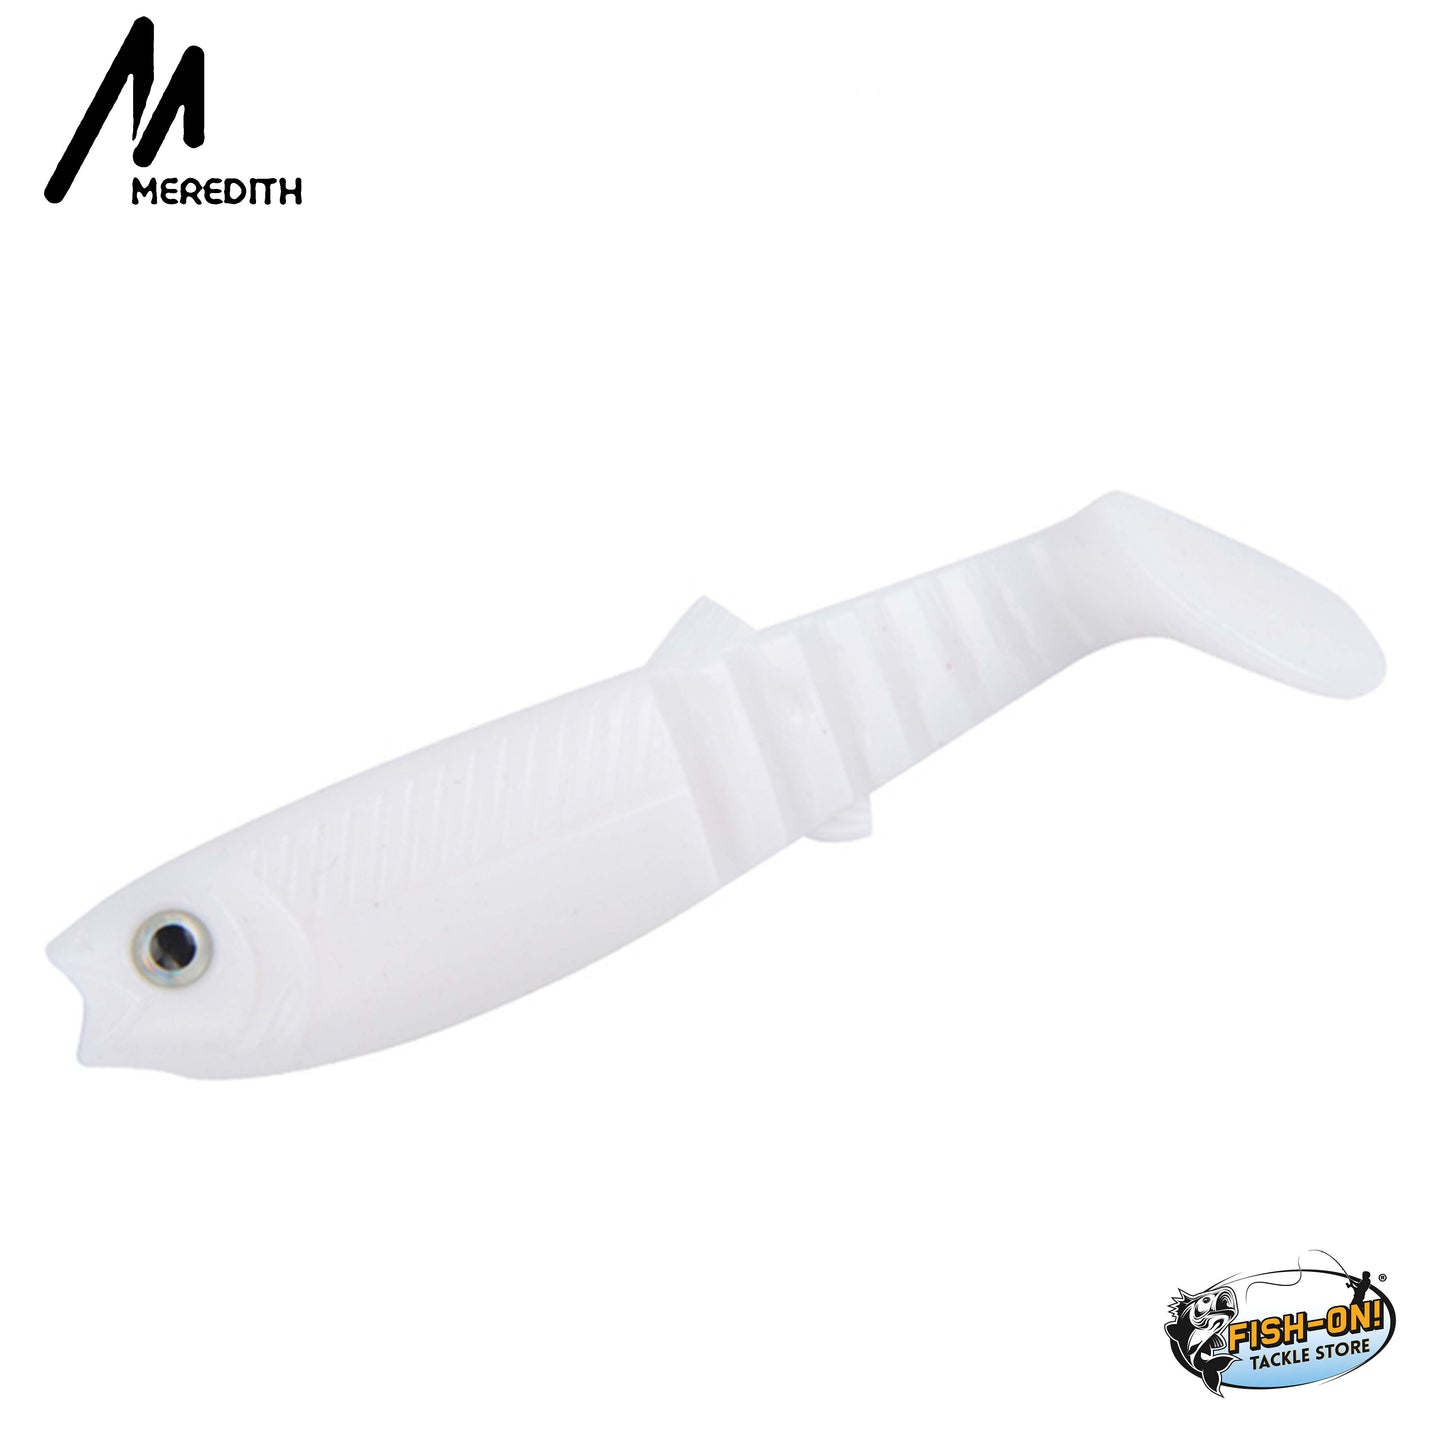 Meredith Rubber Shad 8Cm